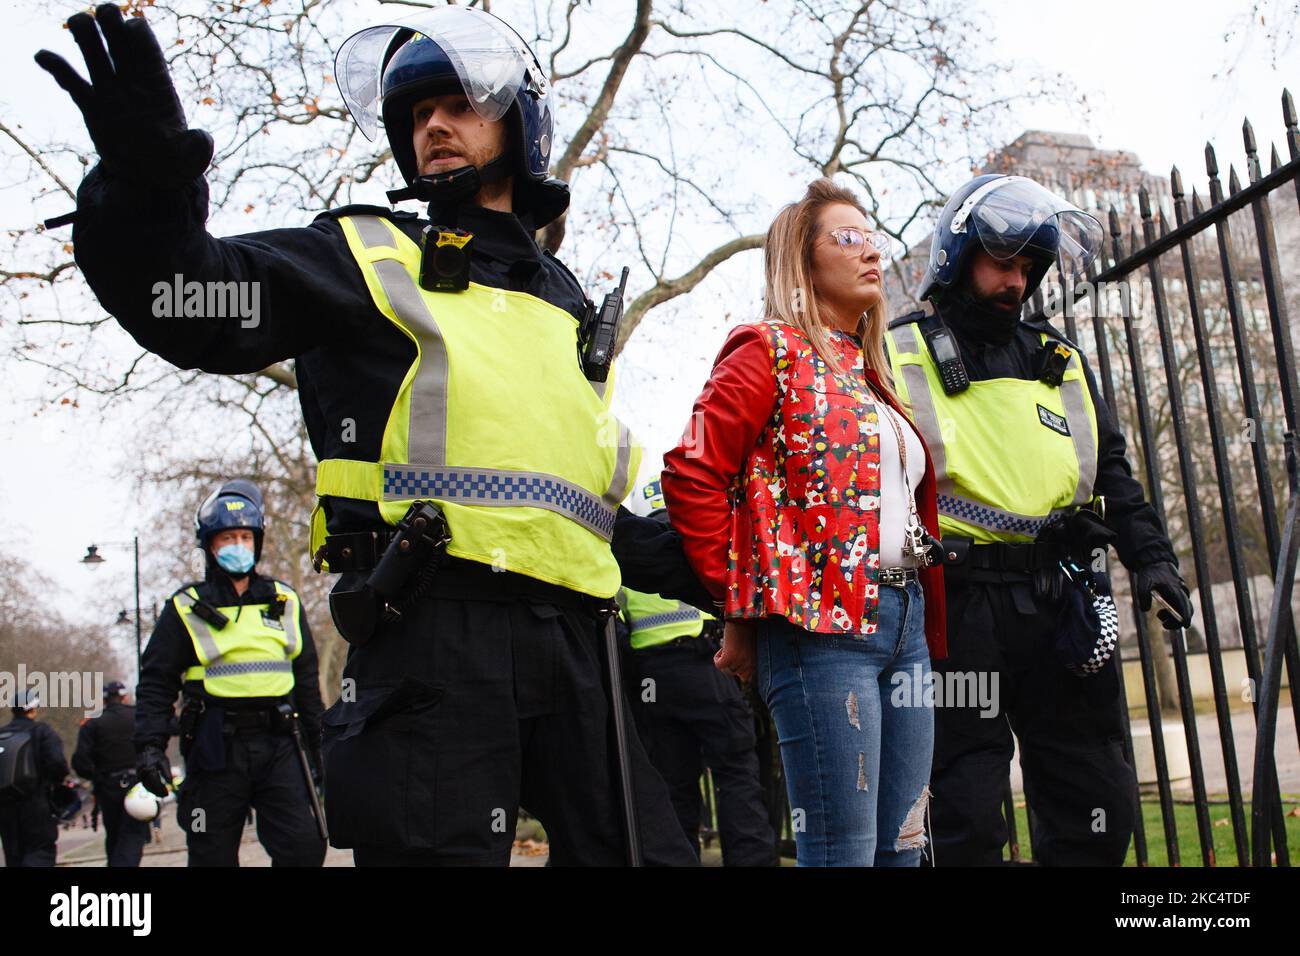 An anti-lockdown activist is arrested on Birdcage Walk during a demonstration in London, England, on November 28, 2020. In an evening update the Metropolitan Police announced it had made 155 arrests over the course of the day's demonstrations, for offences including breaches of coronavirus regulations, assault on police and possession of drugs. London is to return to 'Tier 2' or 'high alert' covid-19 restrictions once the current England-wide coronavirus lockdown ends next Wednesday. All three of the tiers, assigned to local authorities across England, have been strengthened since the lockdown Stock Photo